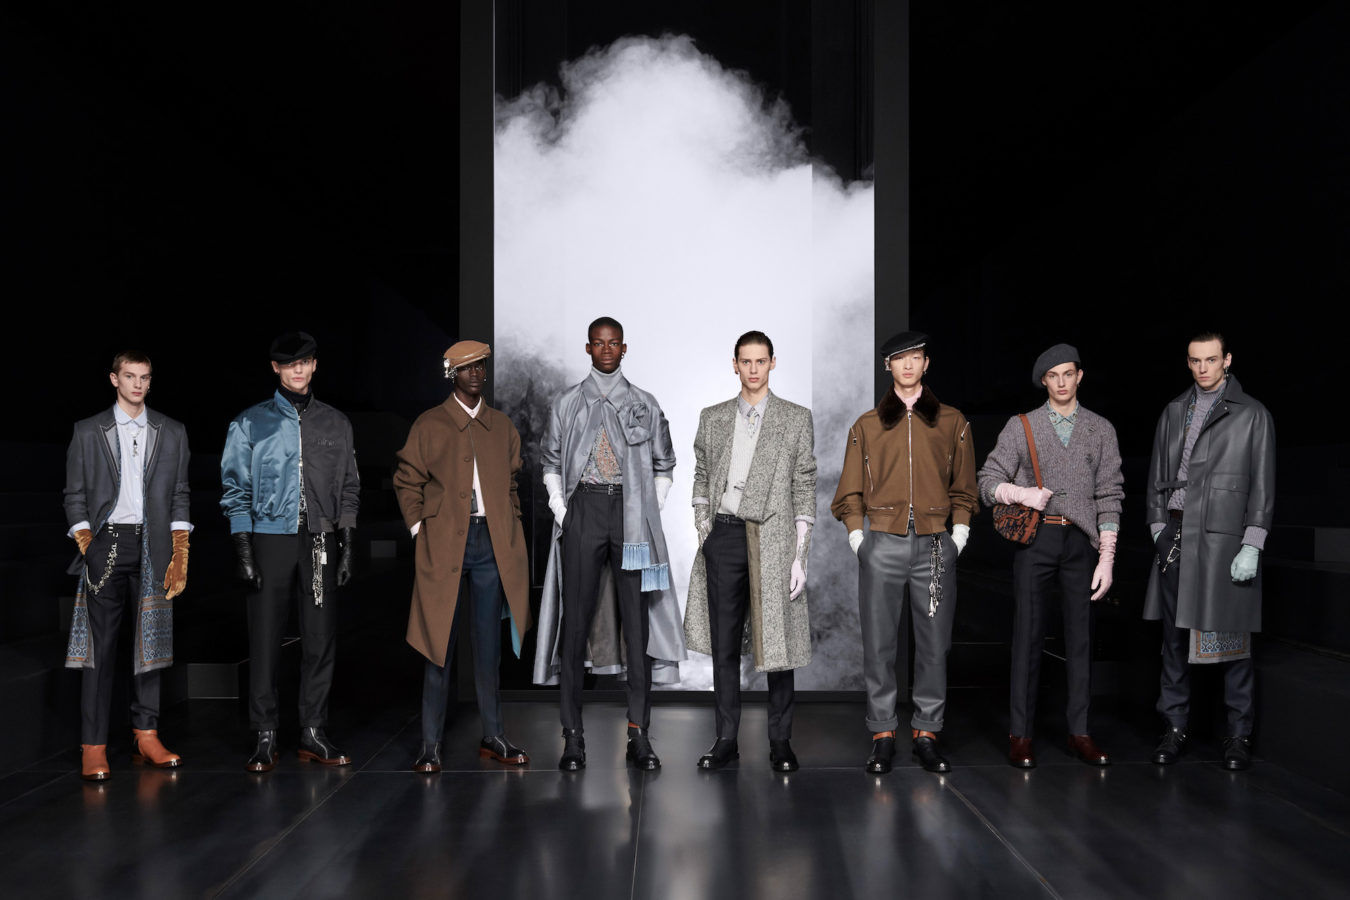 Autumn/Winter 2020 menswear highlights from all your favourite designers